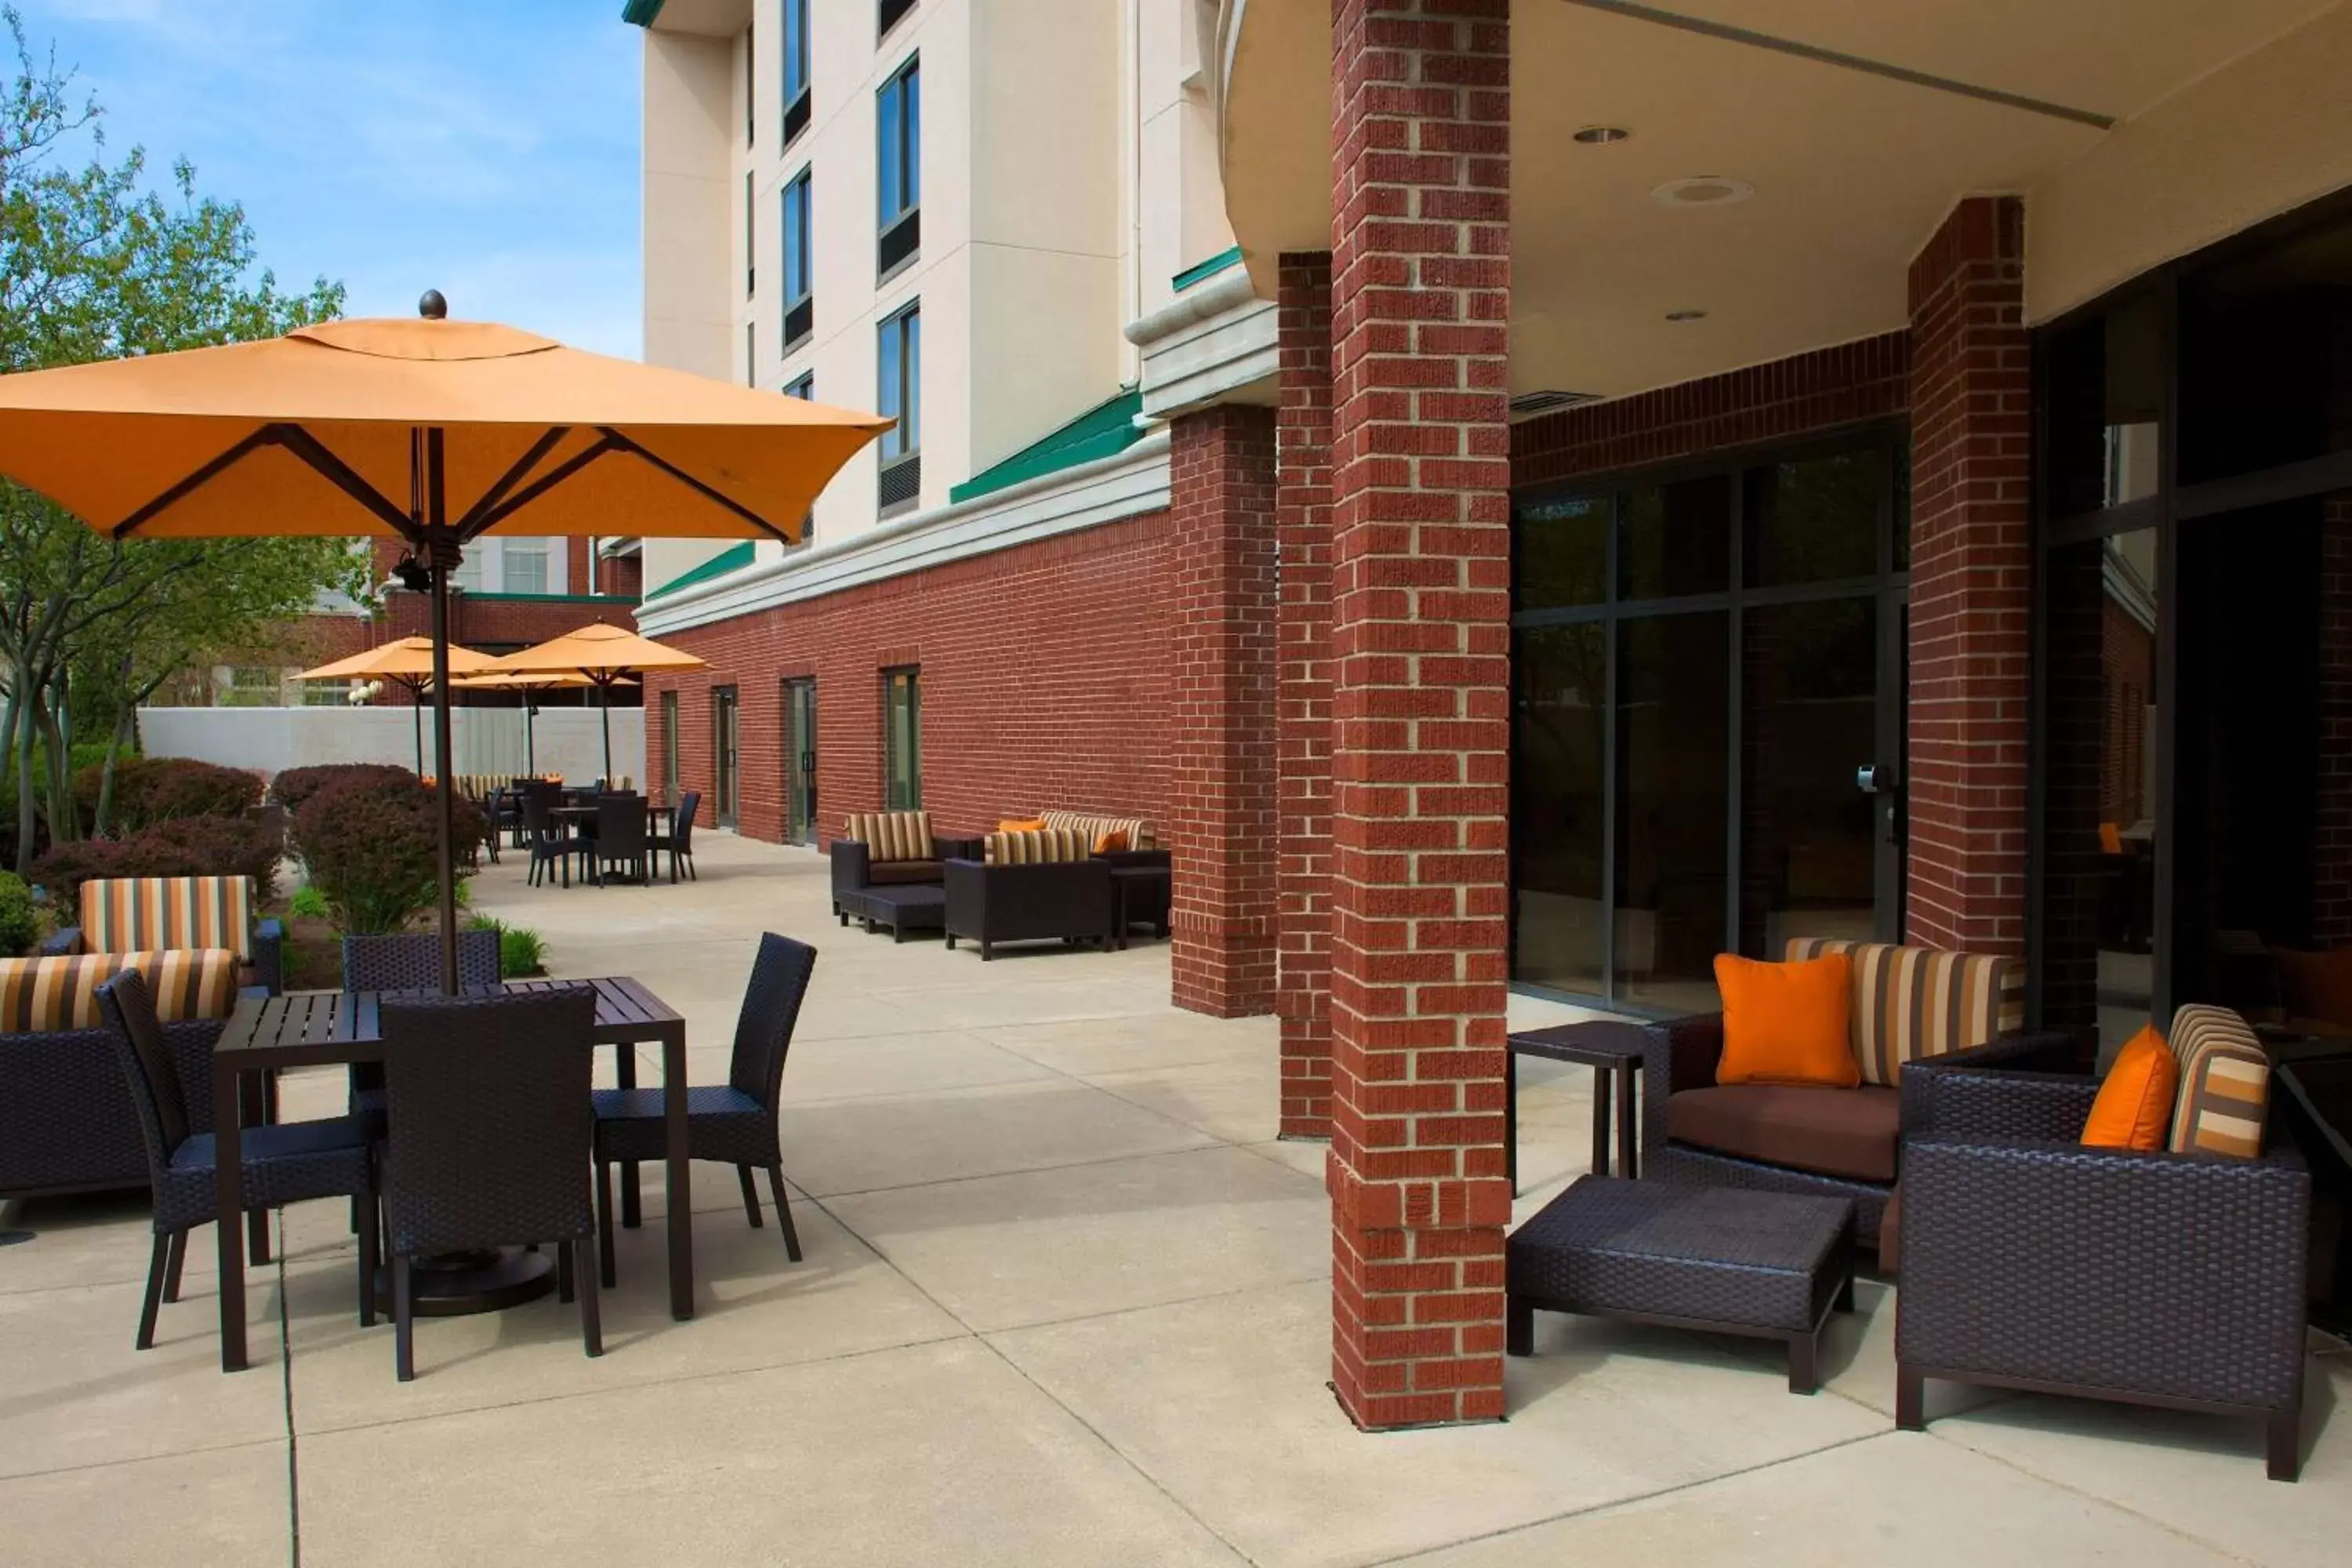 Property building in Courtyard by Marriott Bloomington